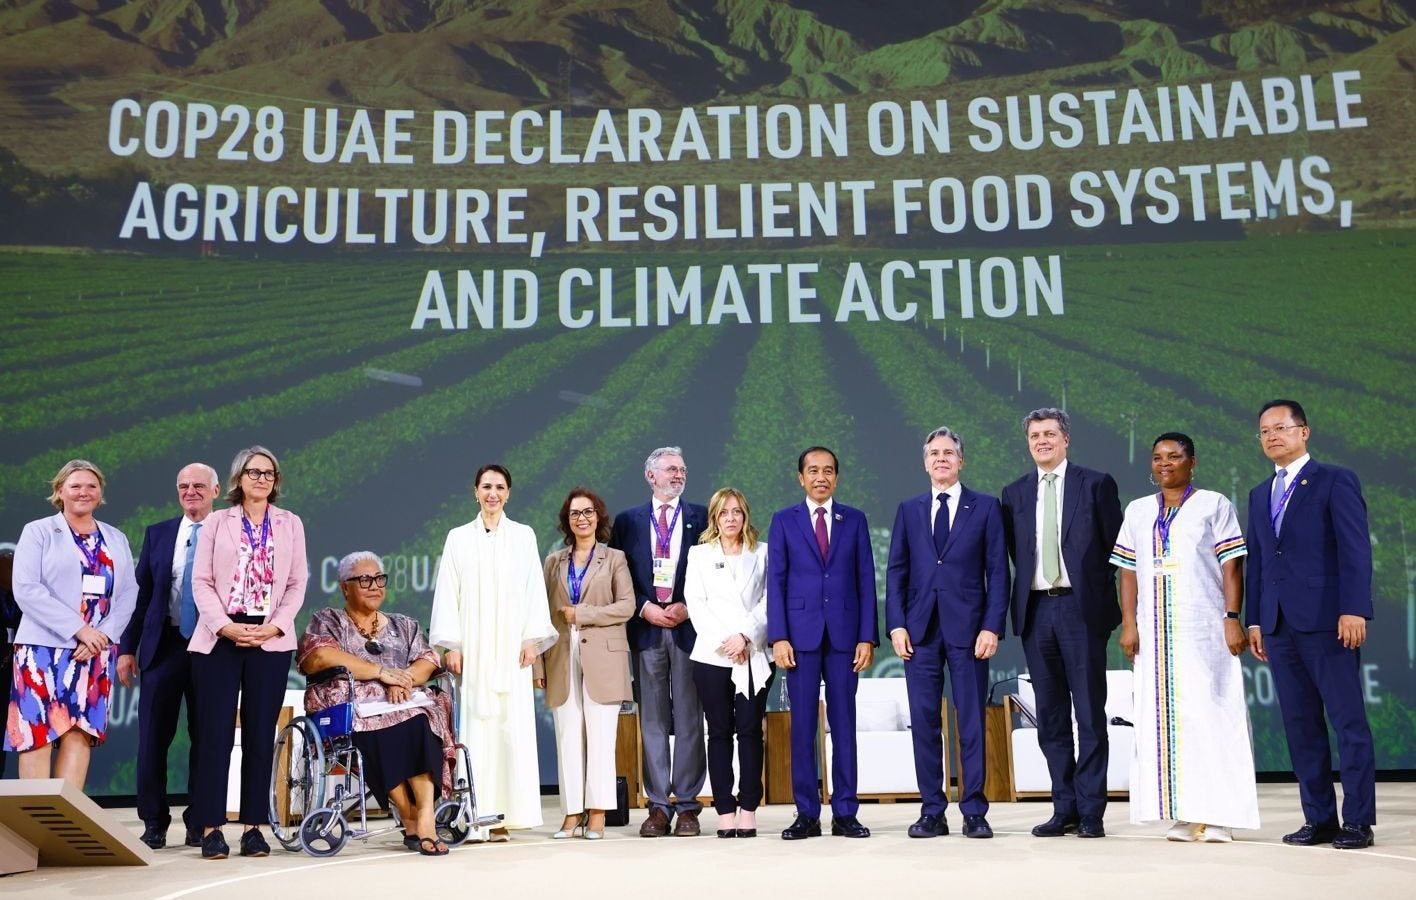 Declaration on food and agriculture announced at COP28